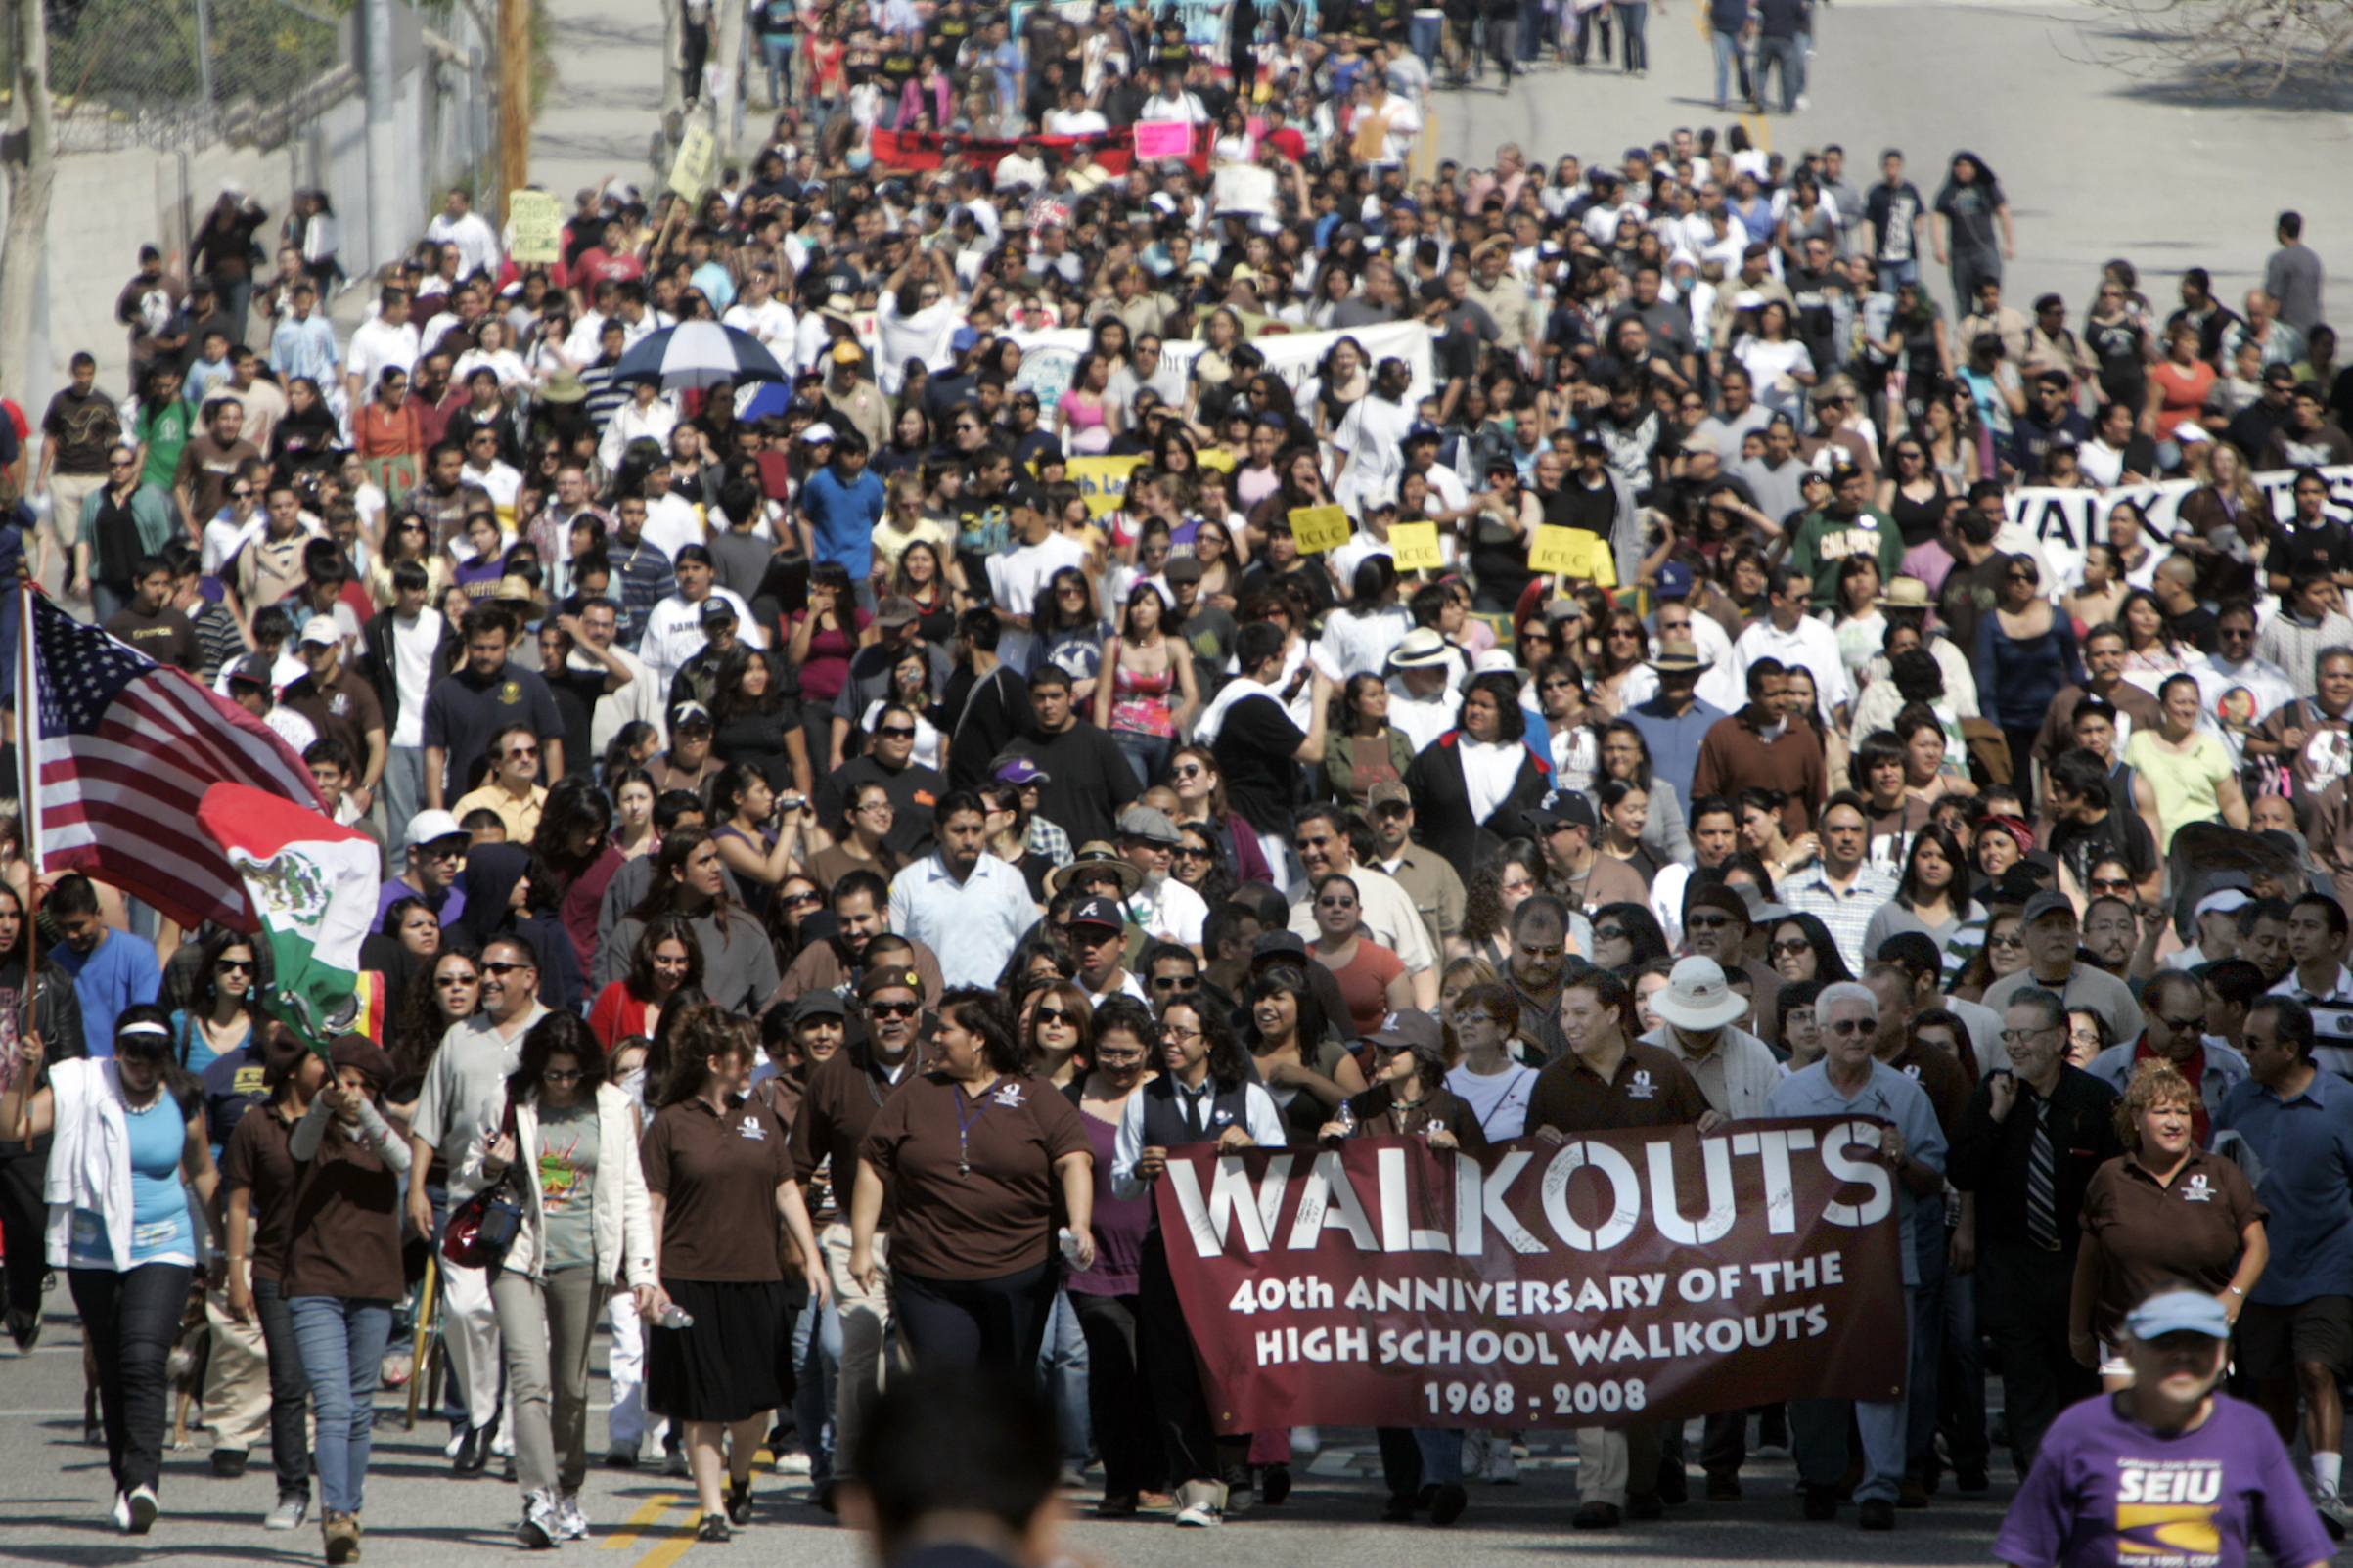 On its 40th anniversary, more than a thousand marchers turned to march from Lincoln High School to commemorate the 1968 East LA school walkout that launched the Chicano Civil Rights Movement. (Annie Wells—LA Times / Getty Images)